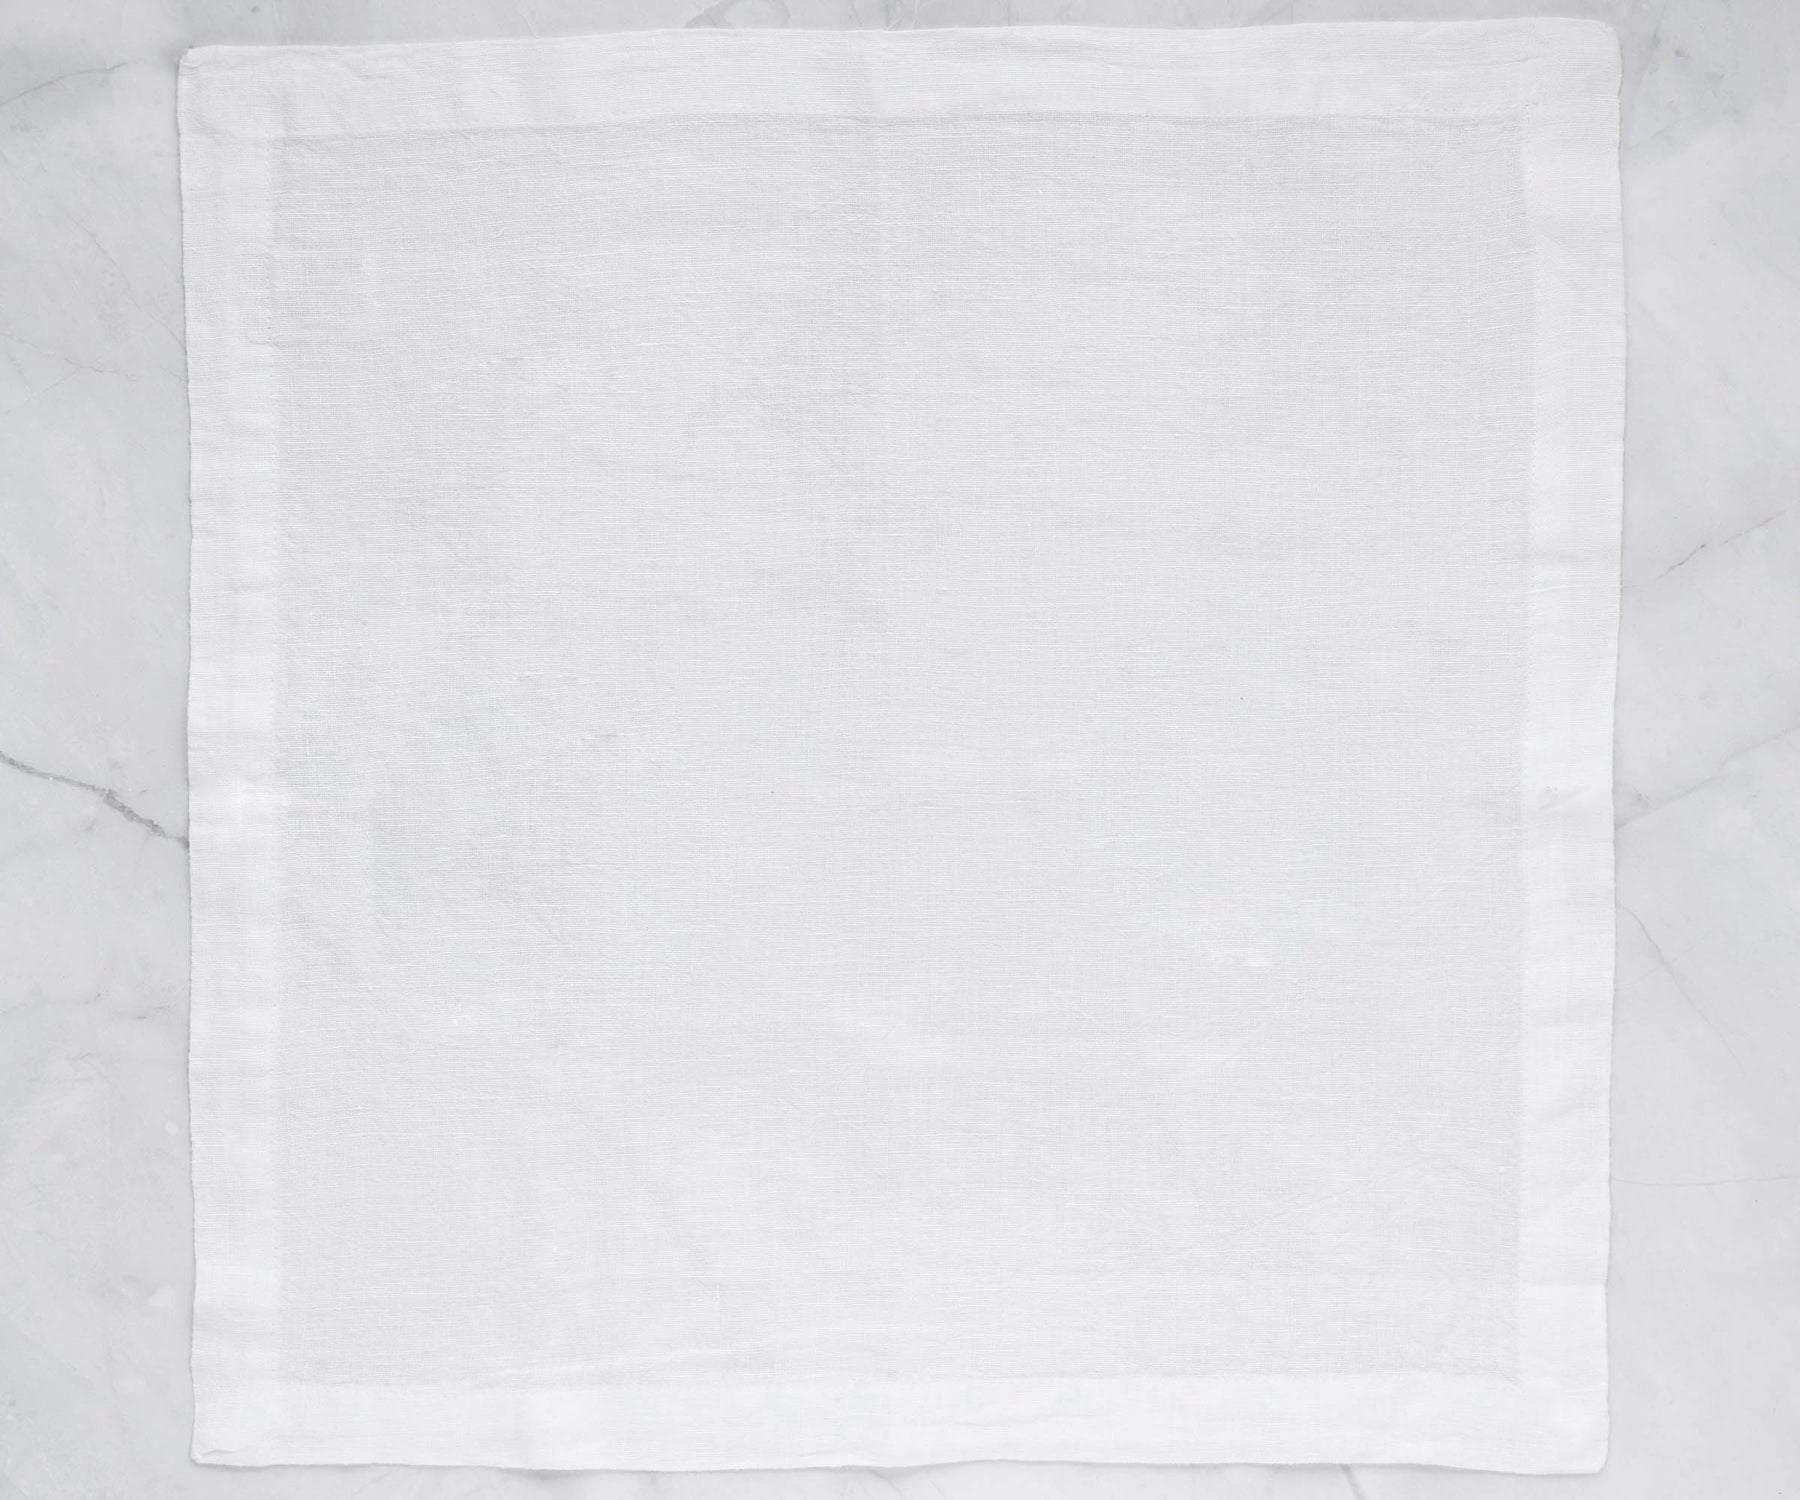 Single white linen napkin laid out on a marble surface